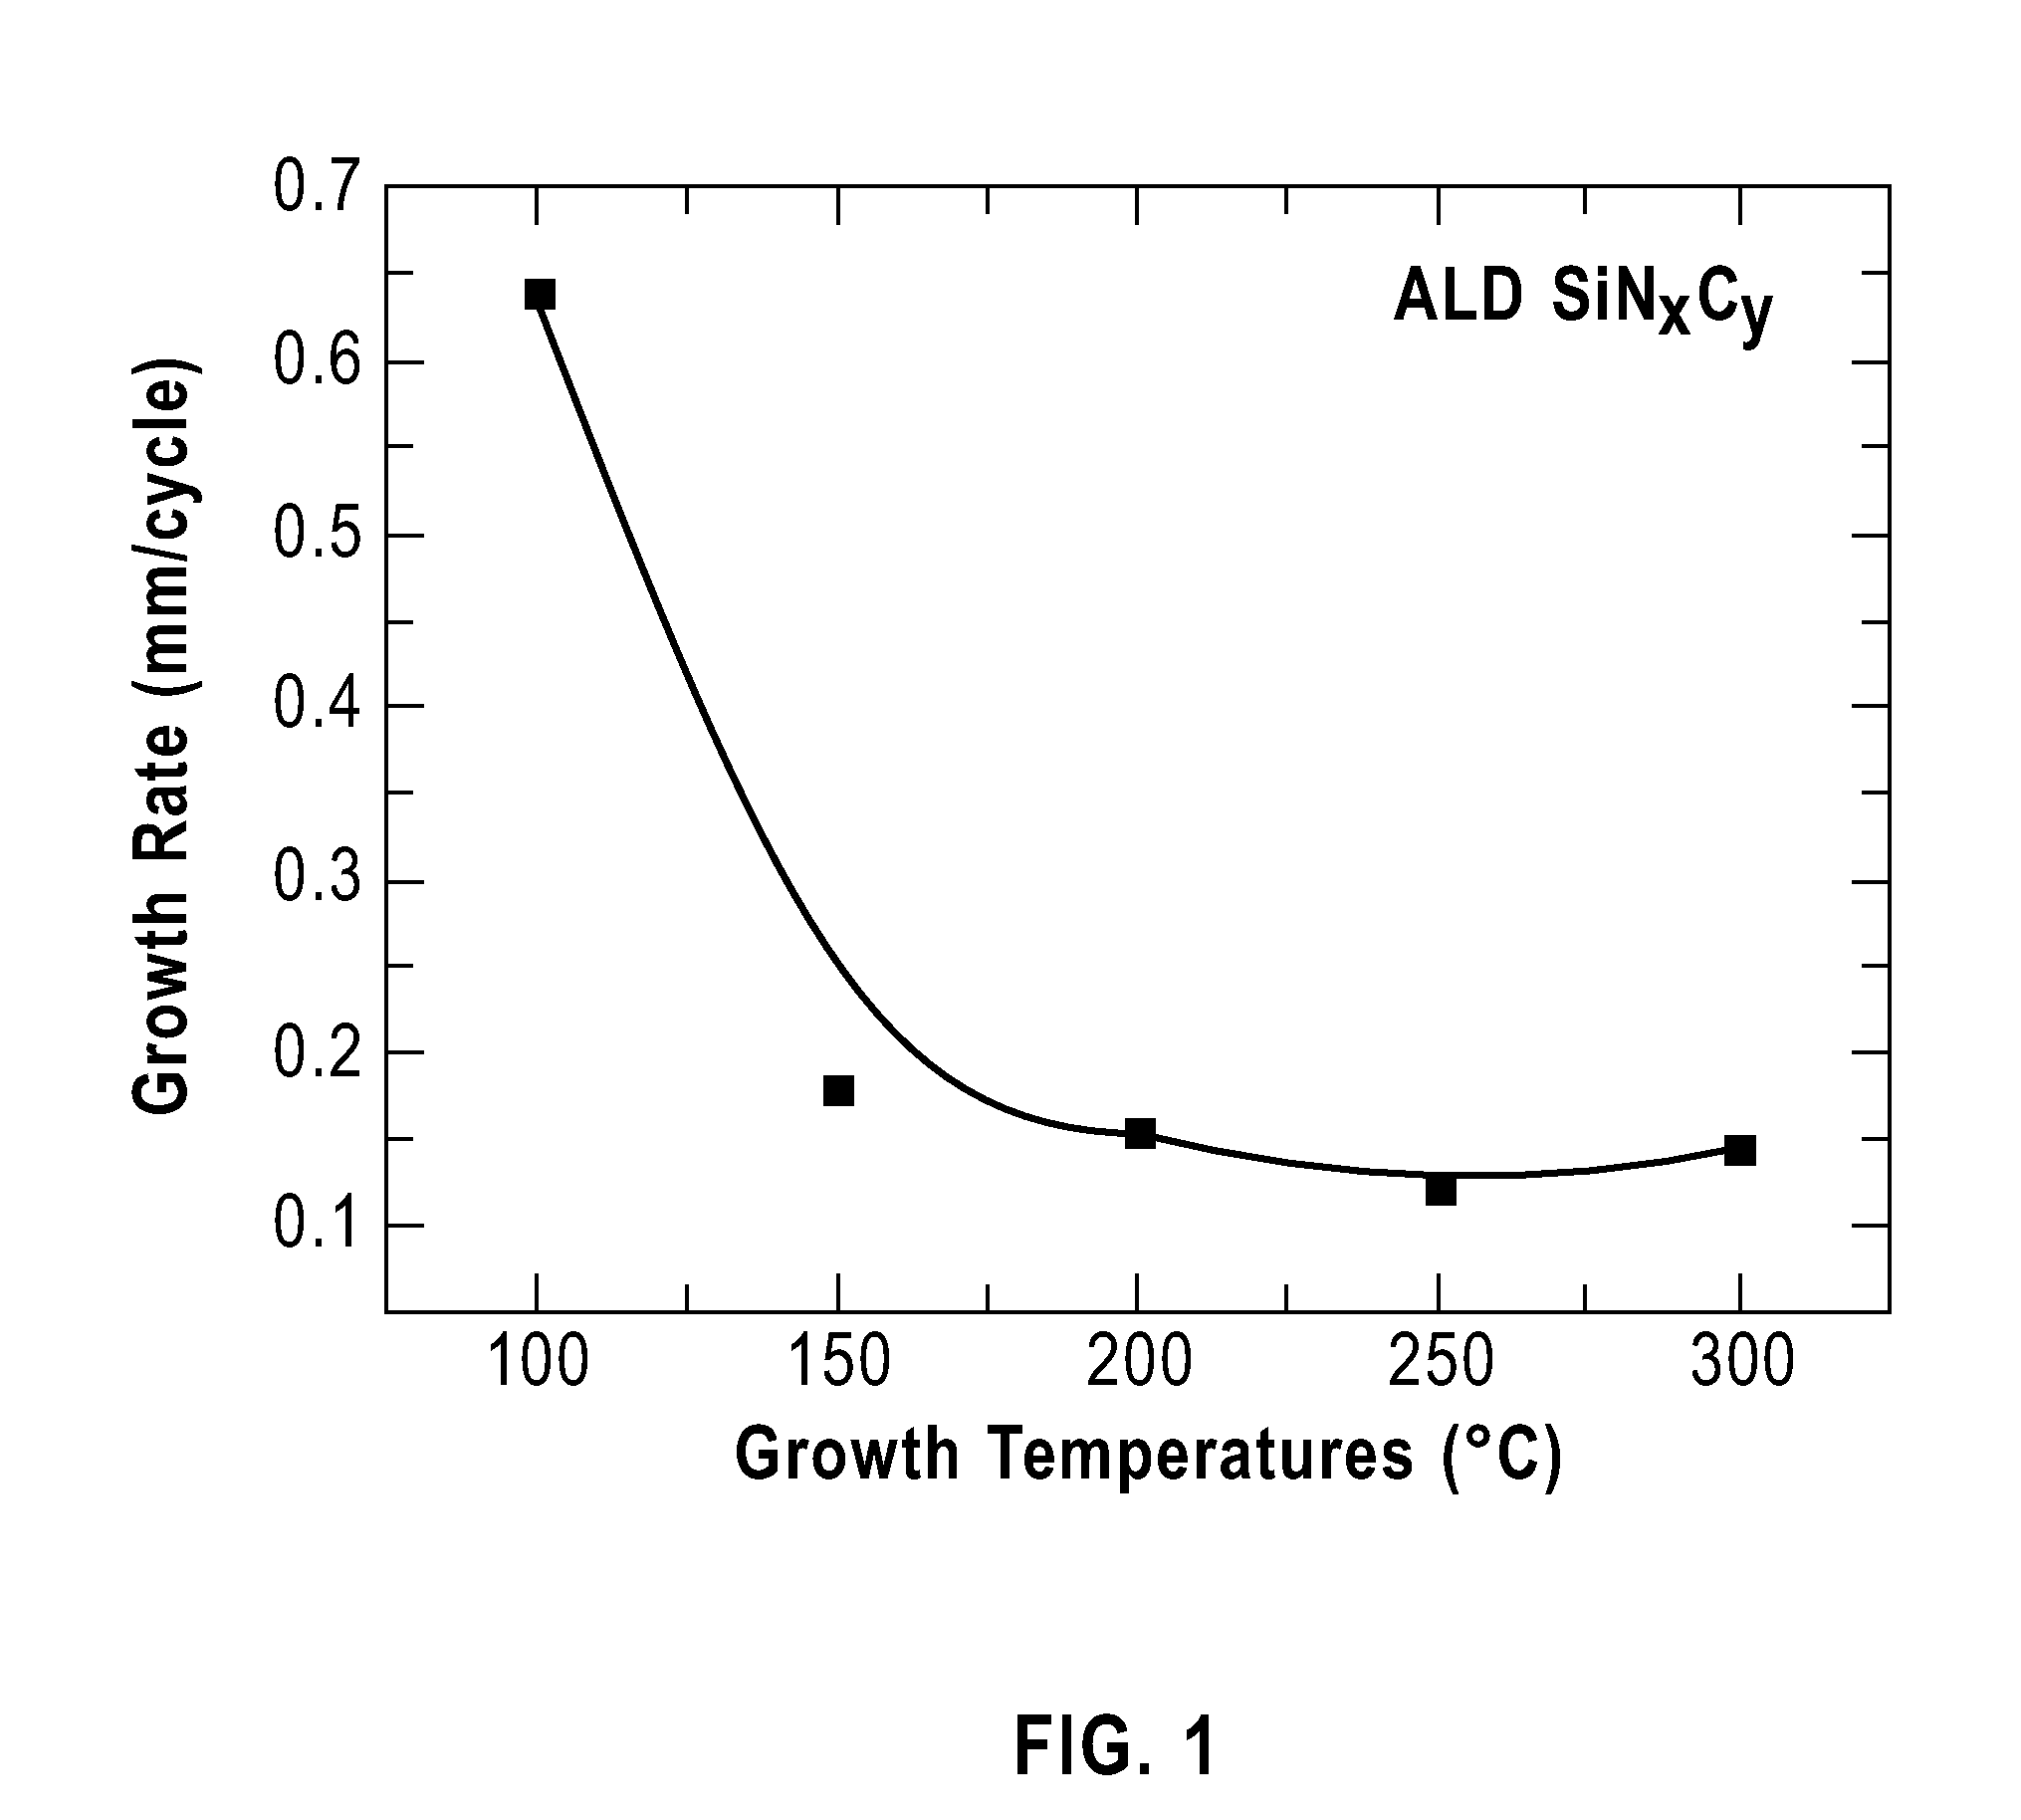 METHOD OF PE-ALD OF SiNxCy AND INTEGRATION OF LINER MATERIALS ON POROUS LOW K SUBSTRATES